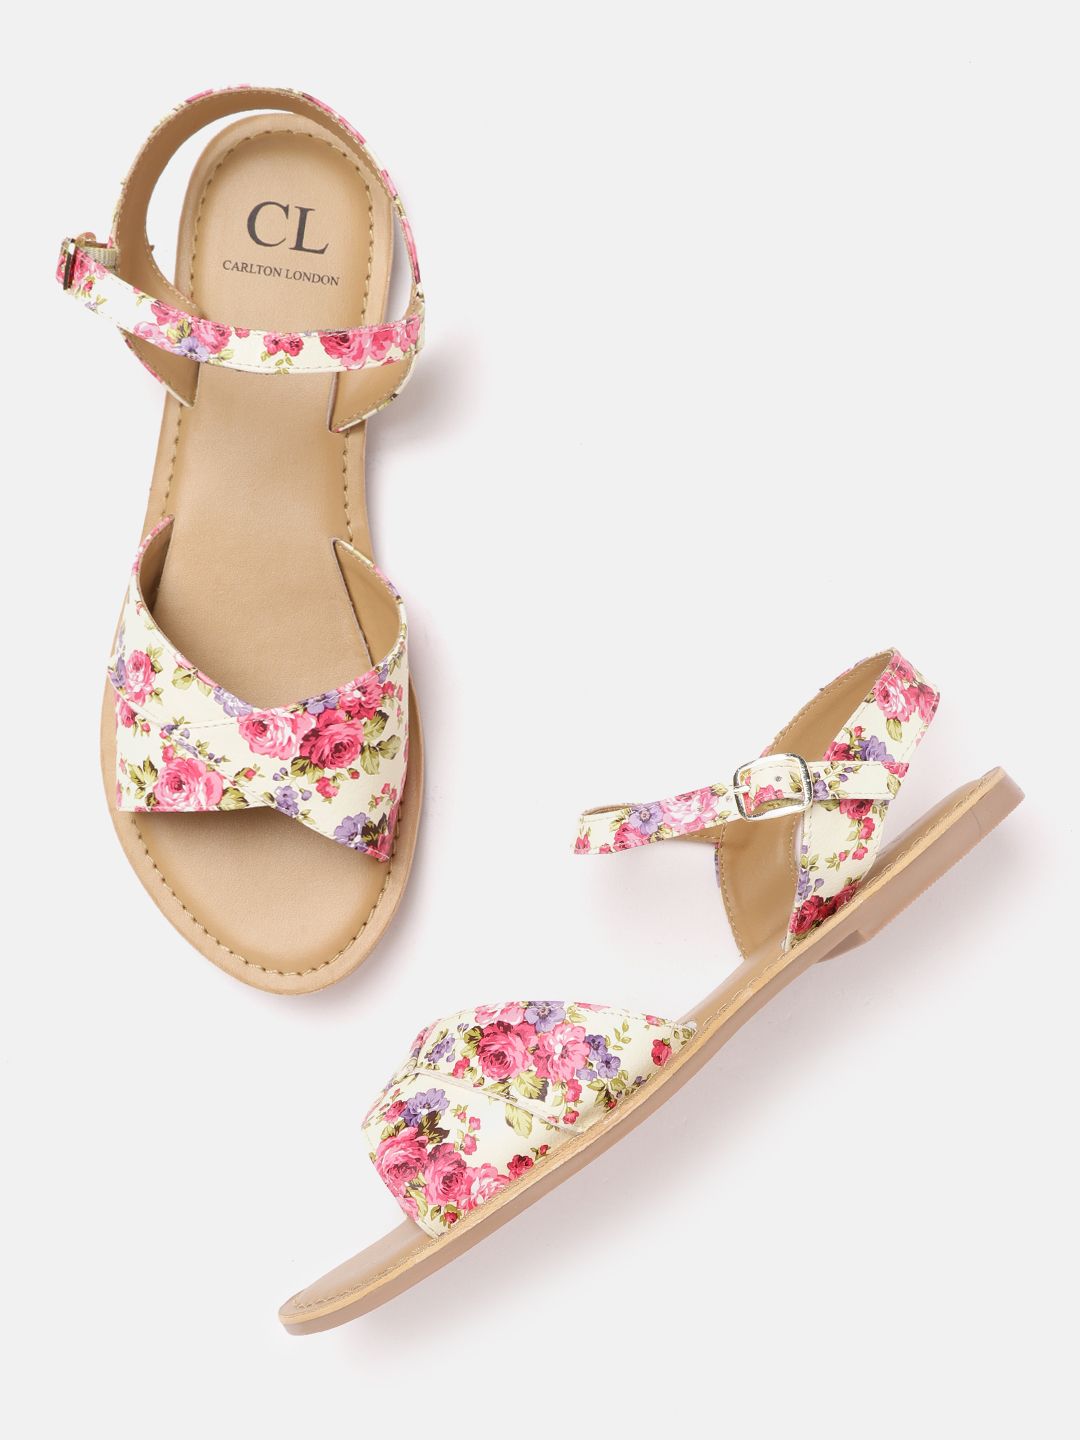 Carlton London Women Cream-Coloured & Pink Floral Print Open Toe Flats Price in India